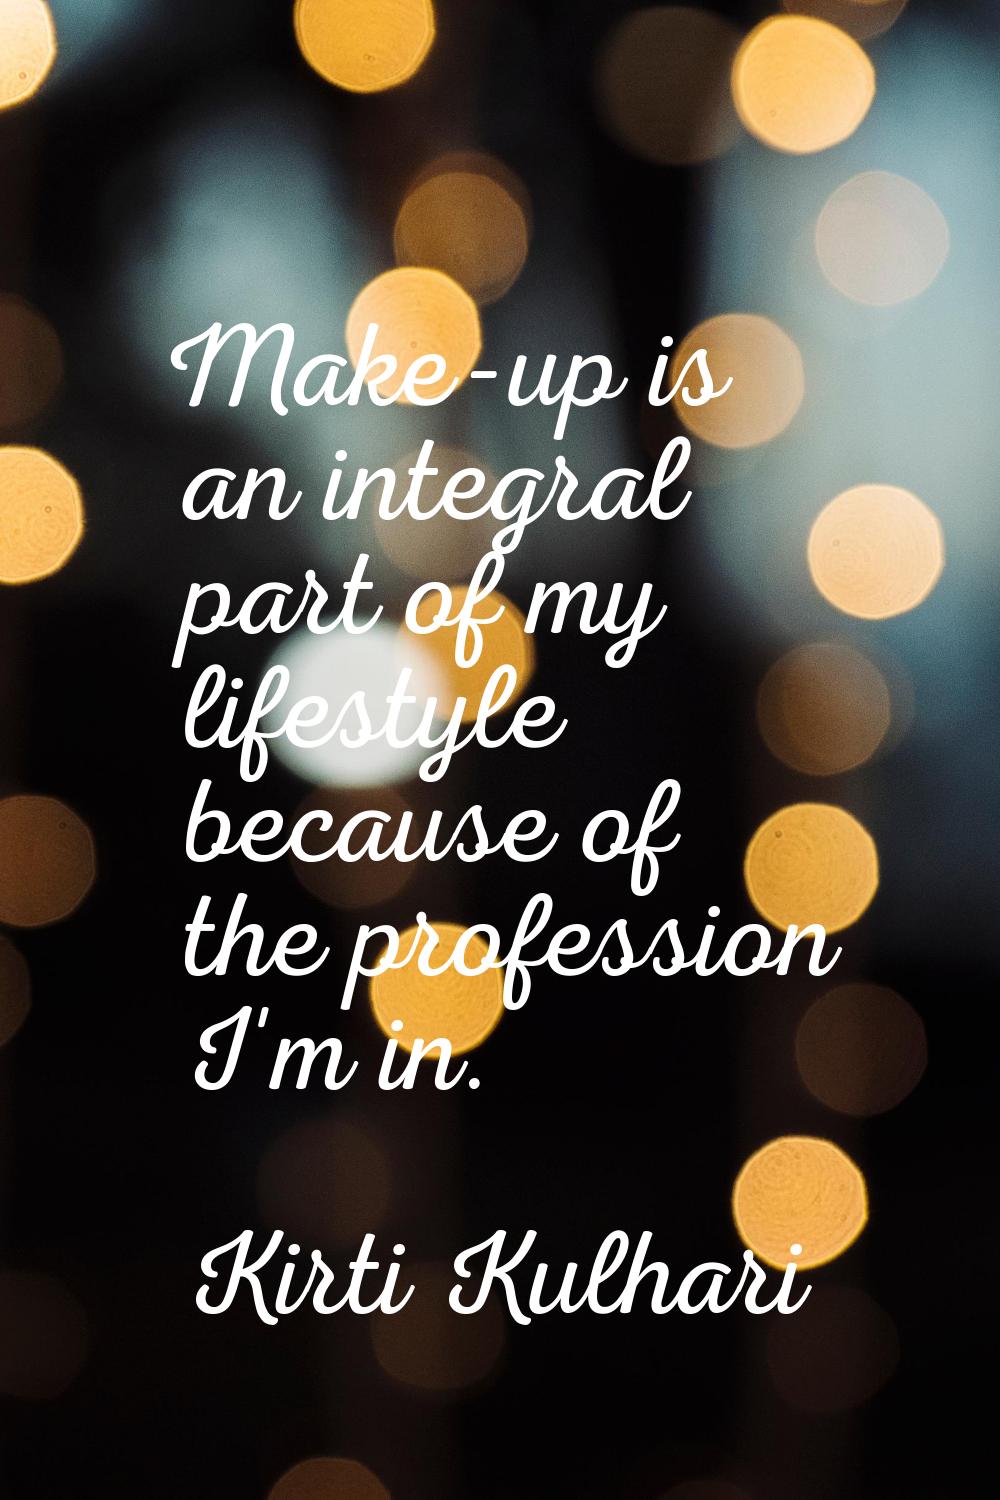 Make-up is an integral part of my lifestyle because of the profession I'm in.